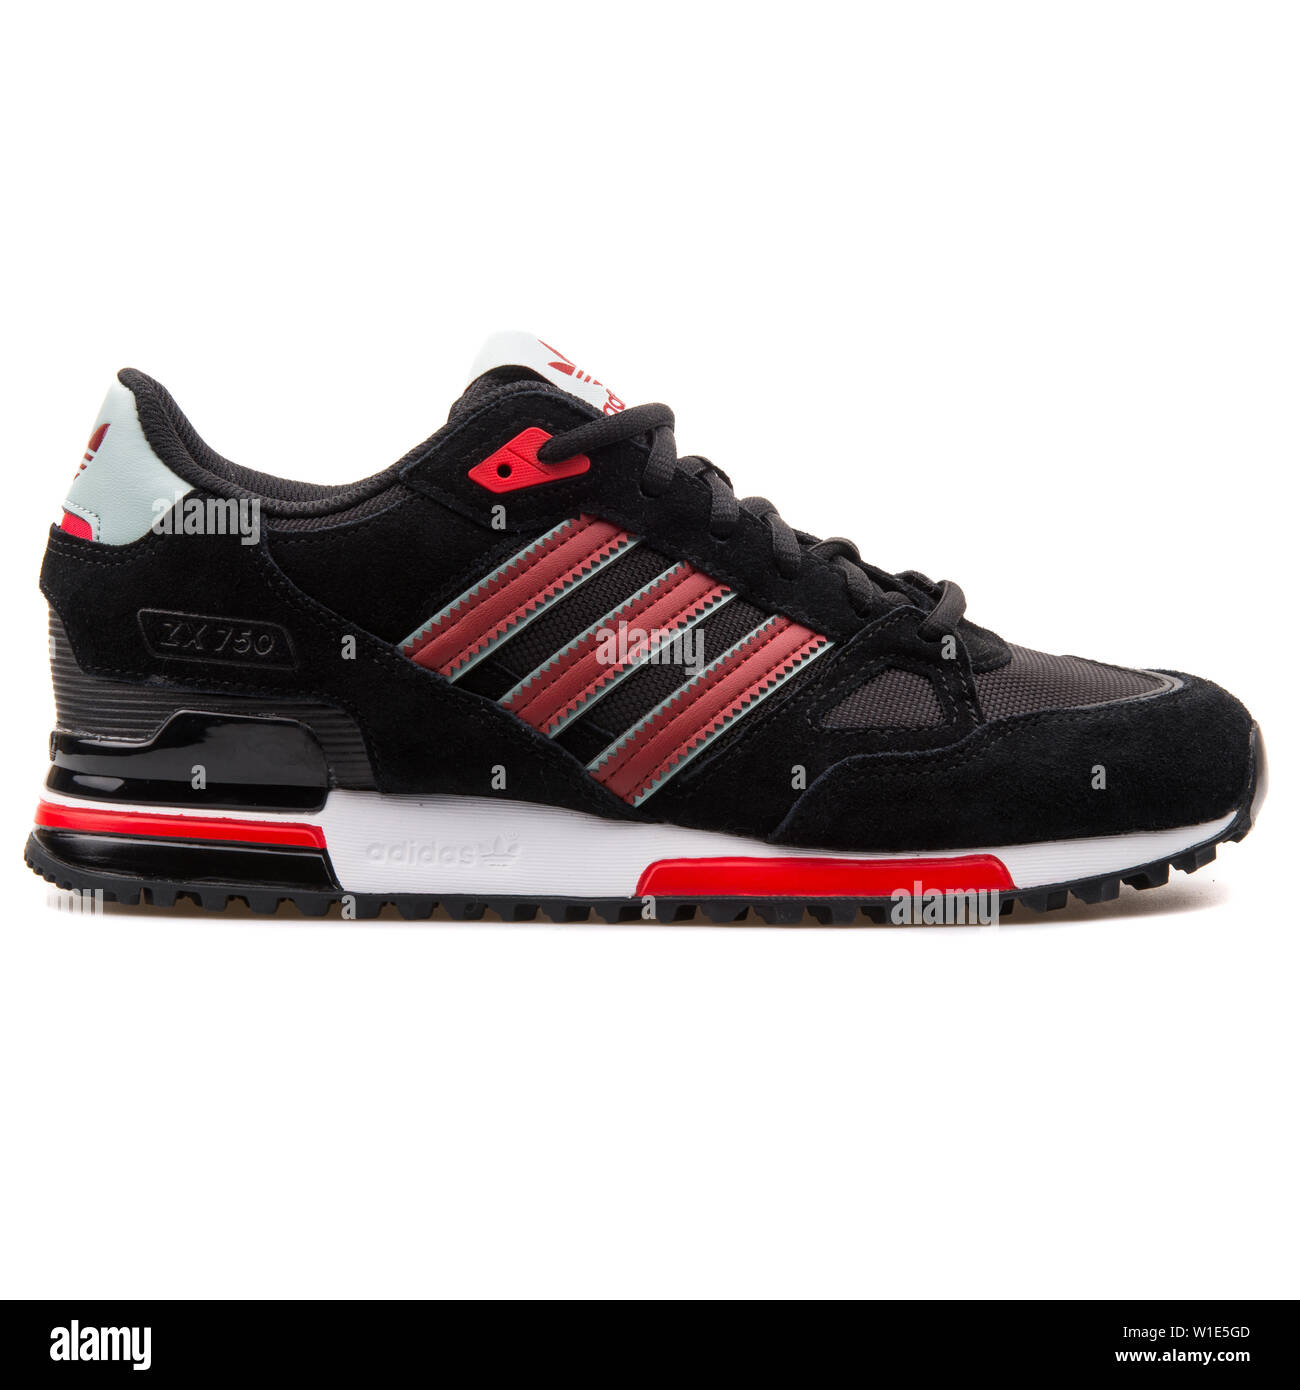 VIENNA, AUSTRIA - AUGUST 25, 2017: Adidas ZX 750 black and red sneaker on  white background Stock Photo - Alamy